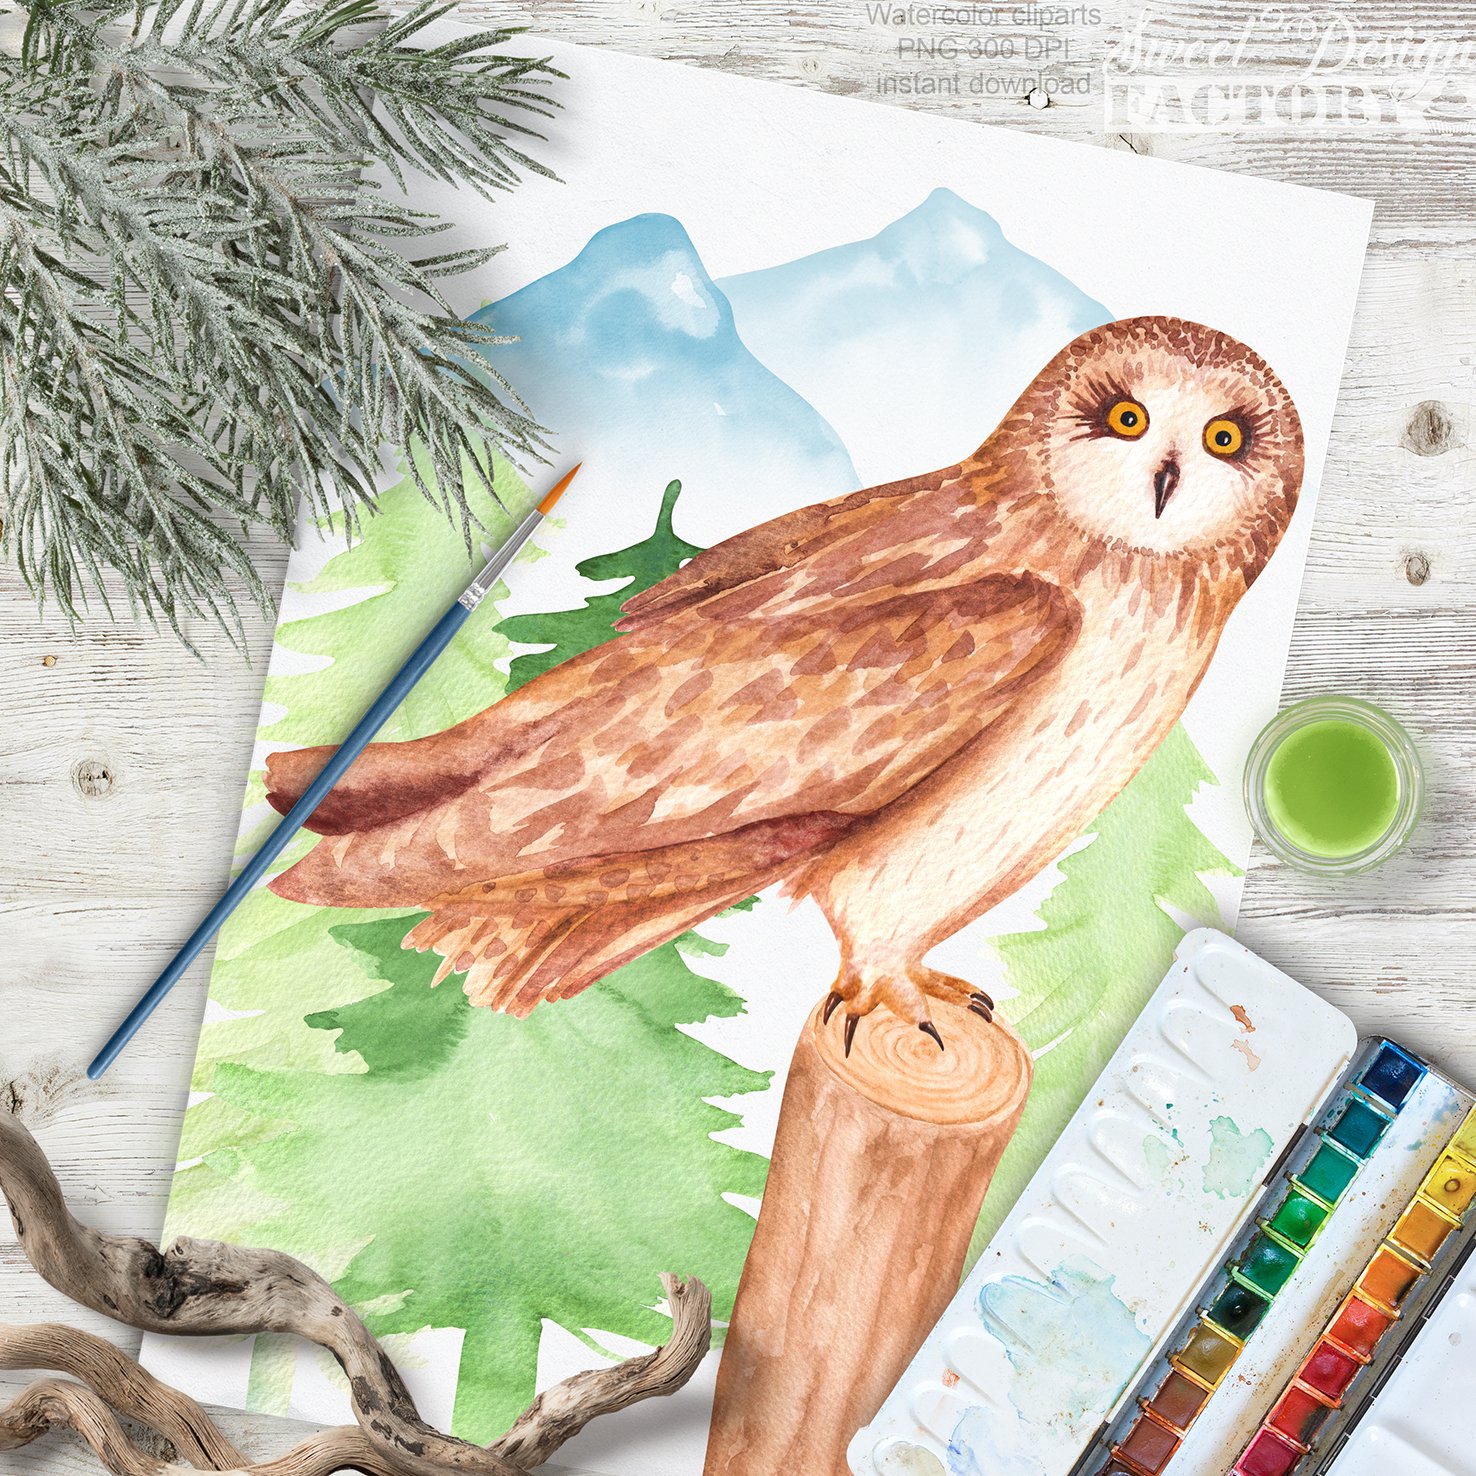 Watercolor wise owl.